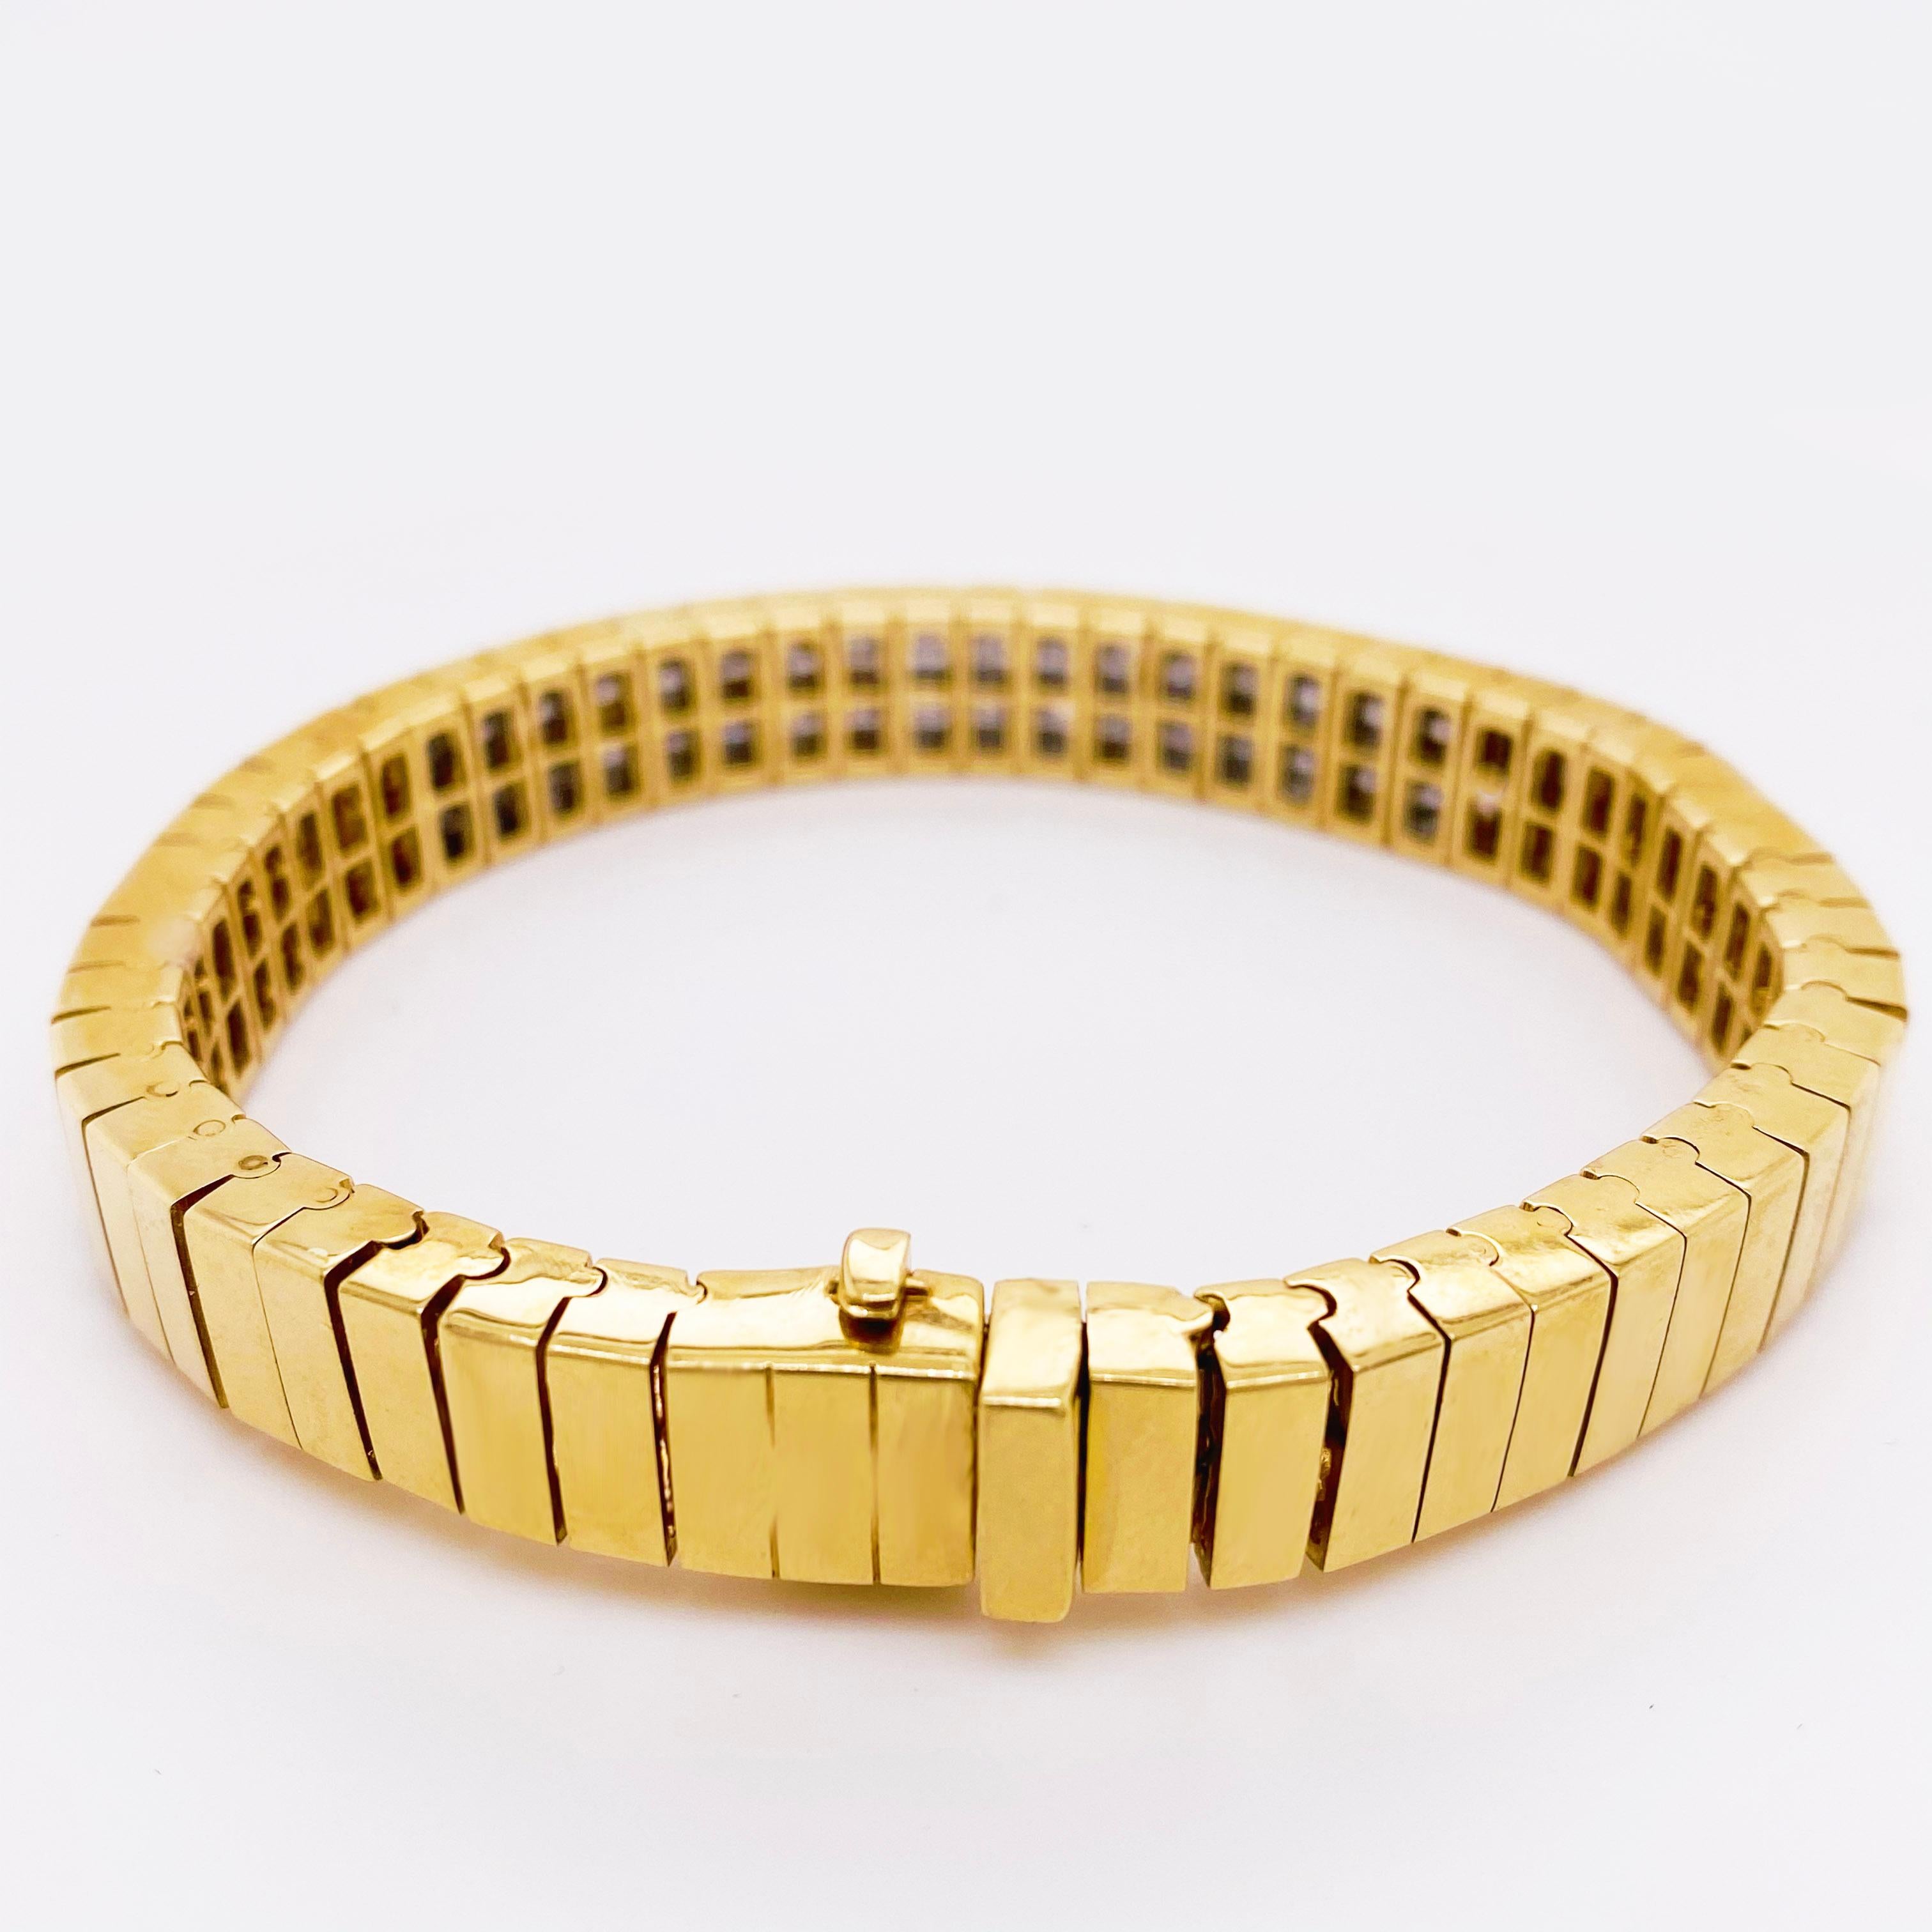 4 Carat Princess Cut Diamond Paved Gold Bracelet, 4.00 Carat Total Weight Dia In Excellent Condition For Sale In Austin, TX